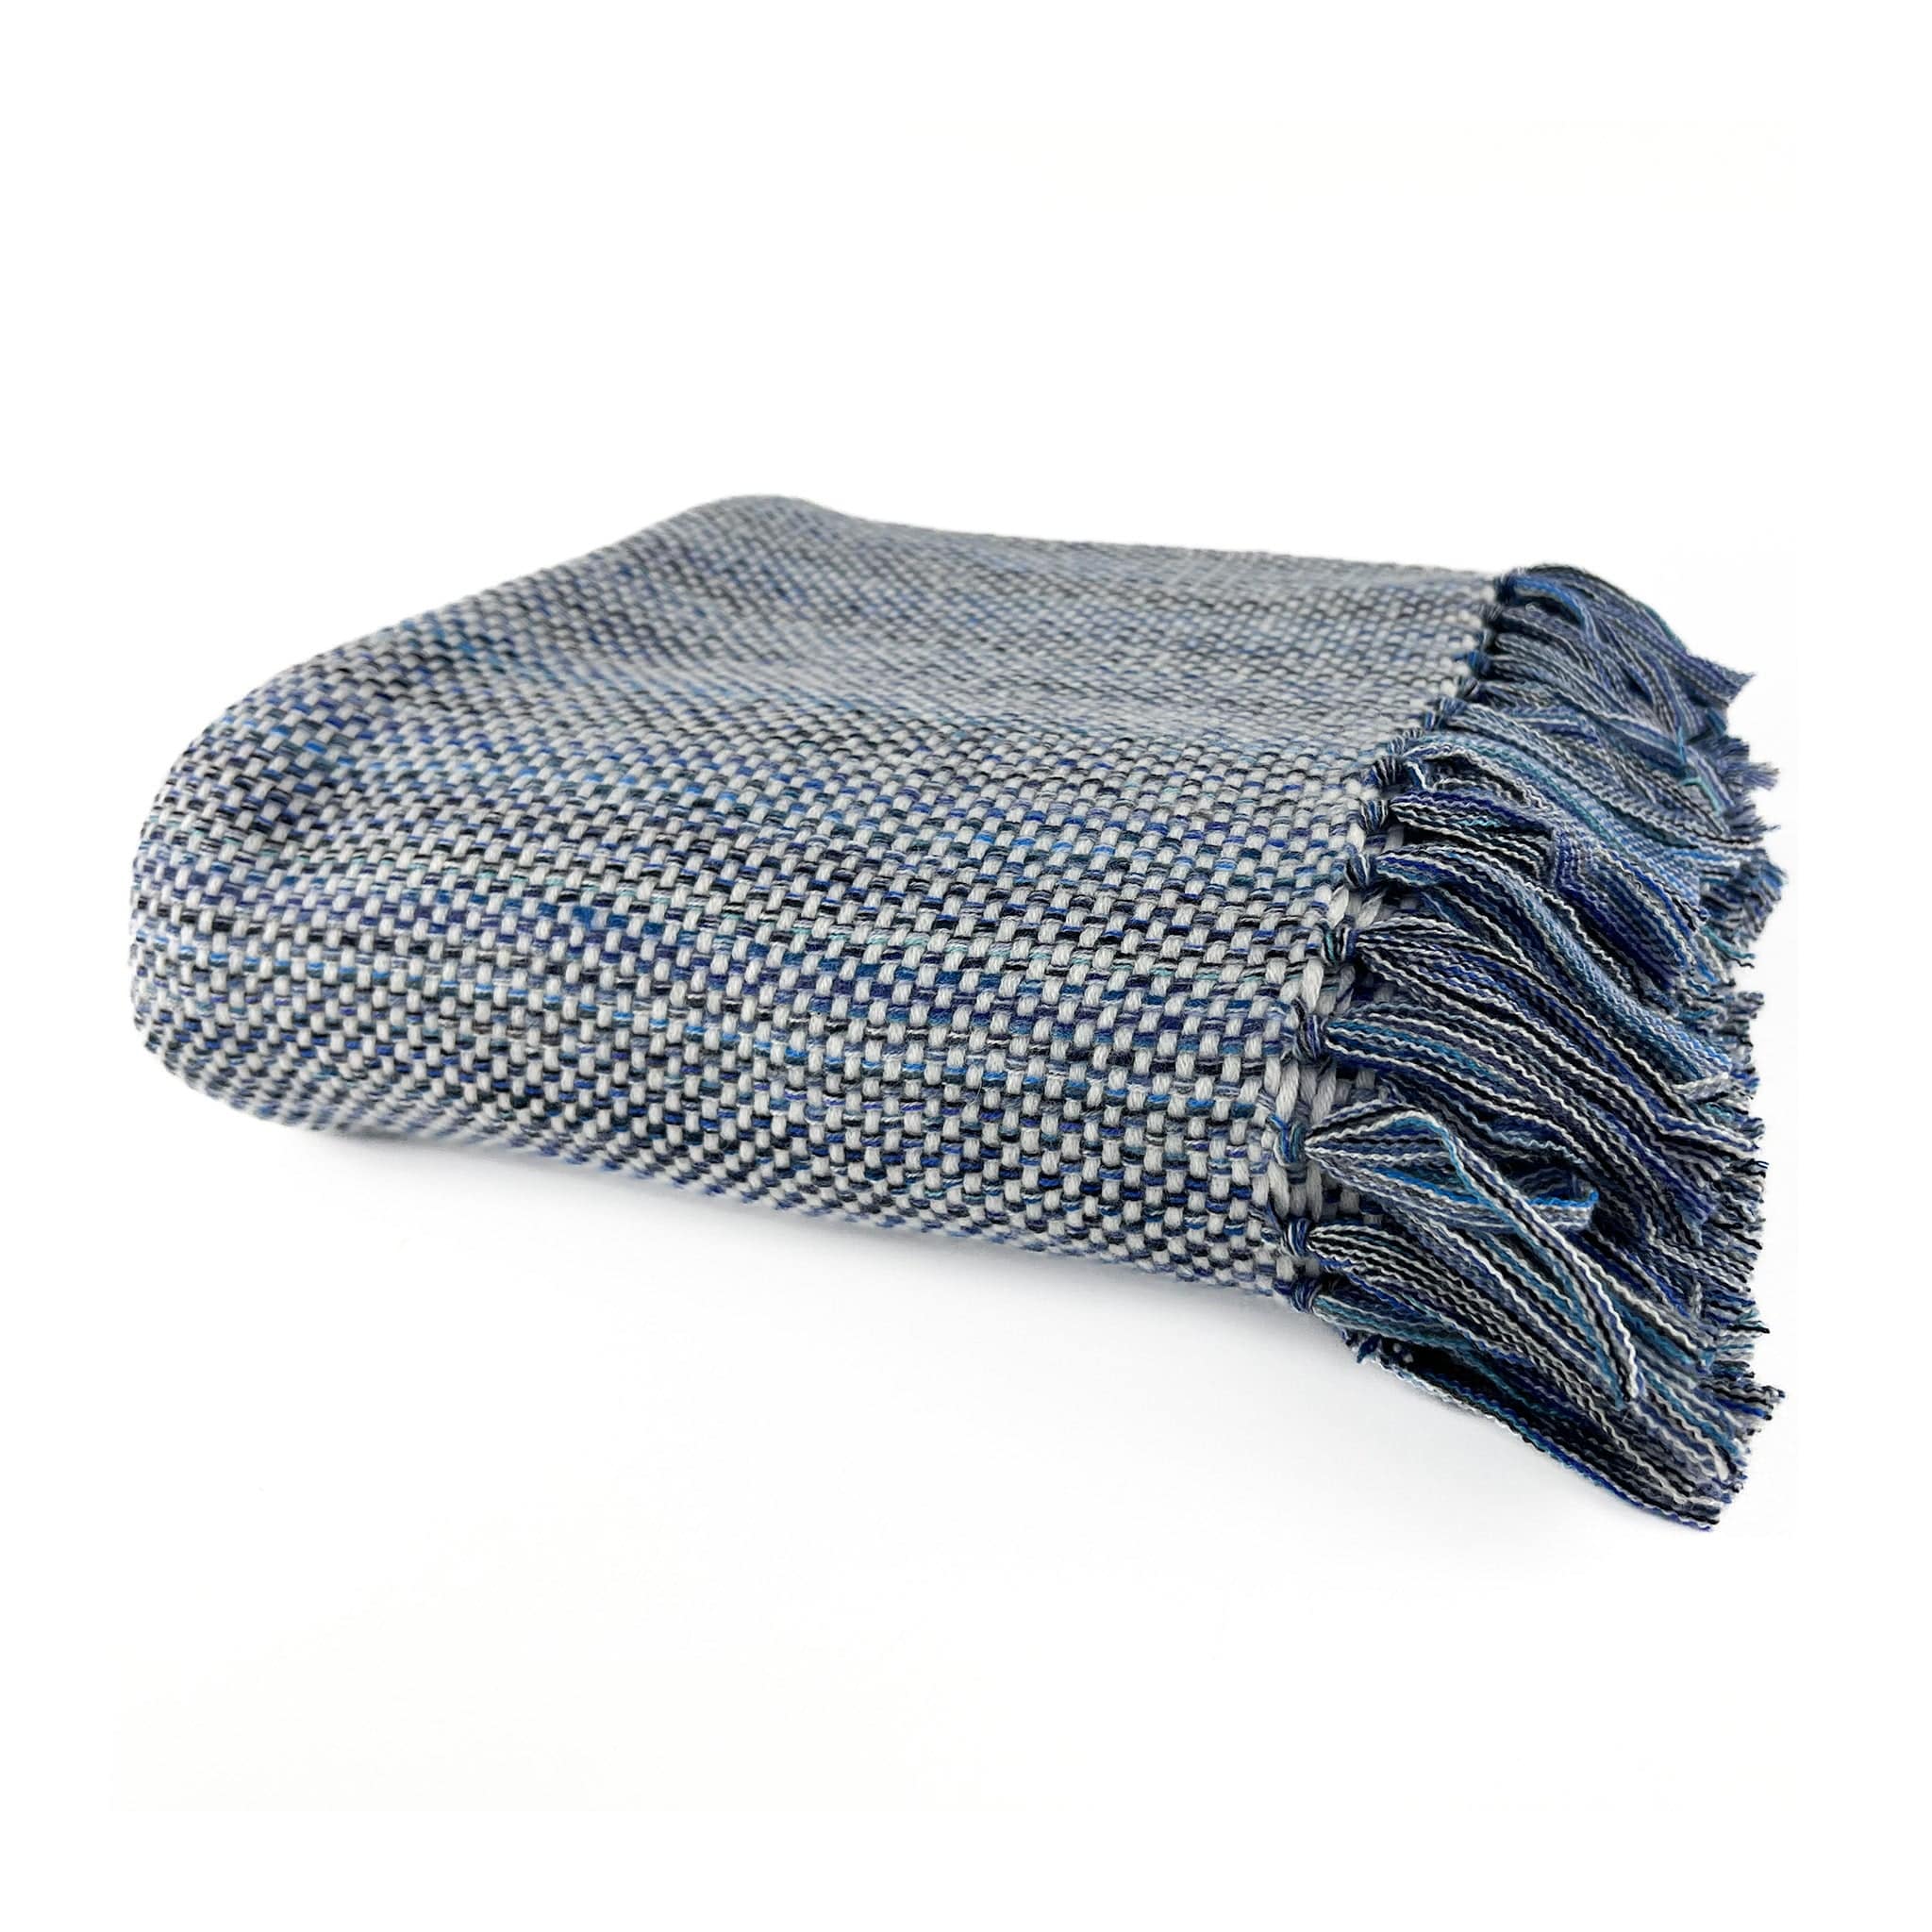 An Italian made Cashmere throw with a white weft and different shades of blue warp, folded on a white background with handknotted multiple shades of blue tassels showing in front right hand side